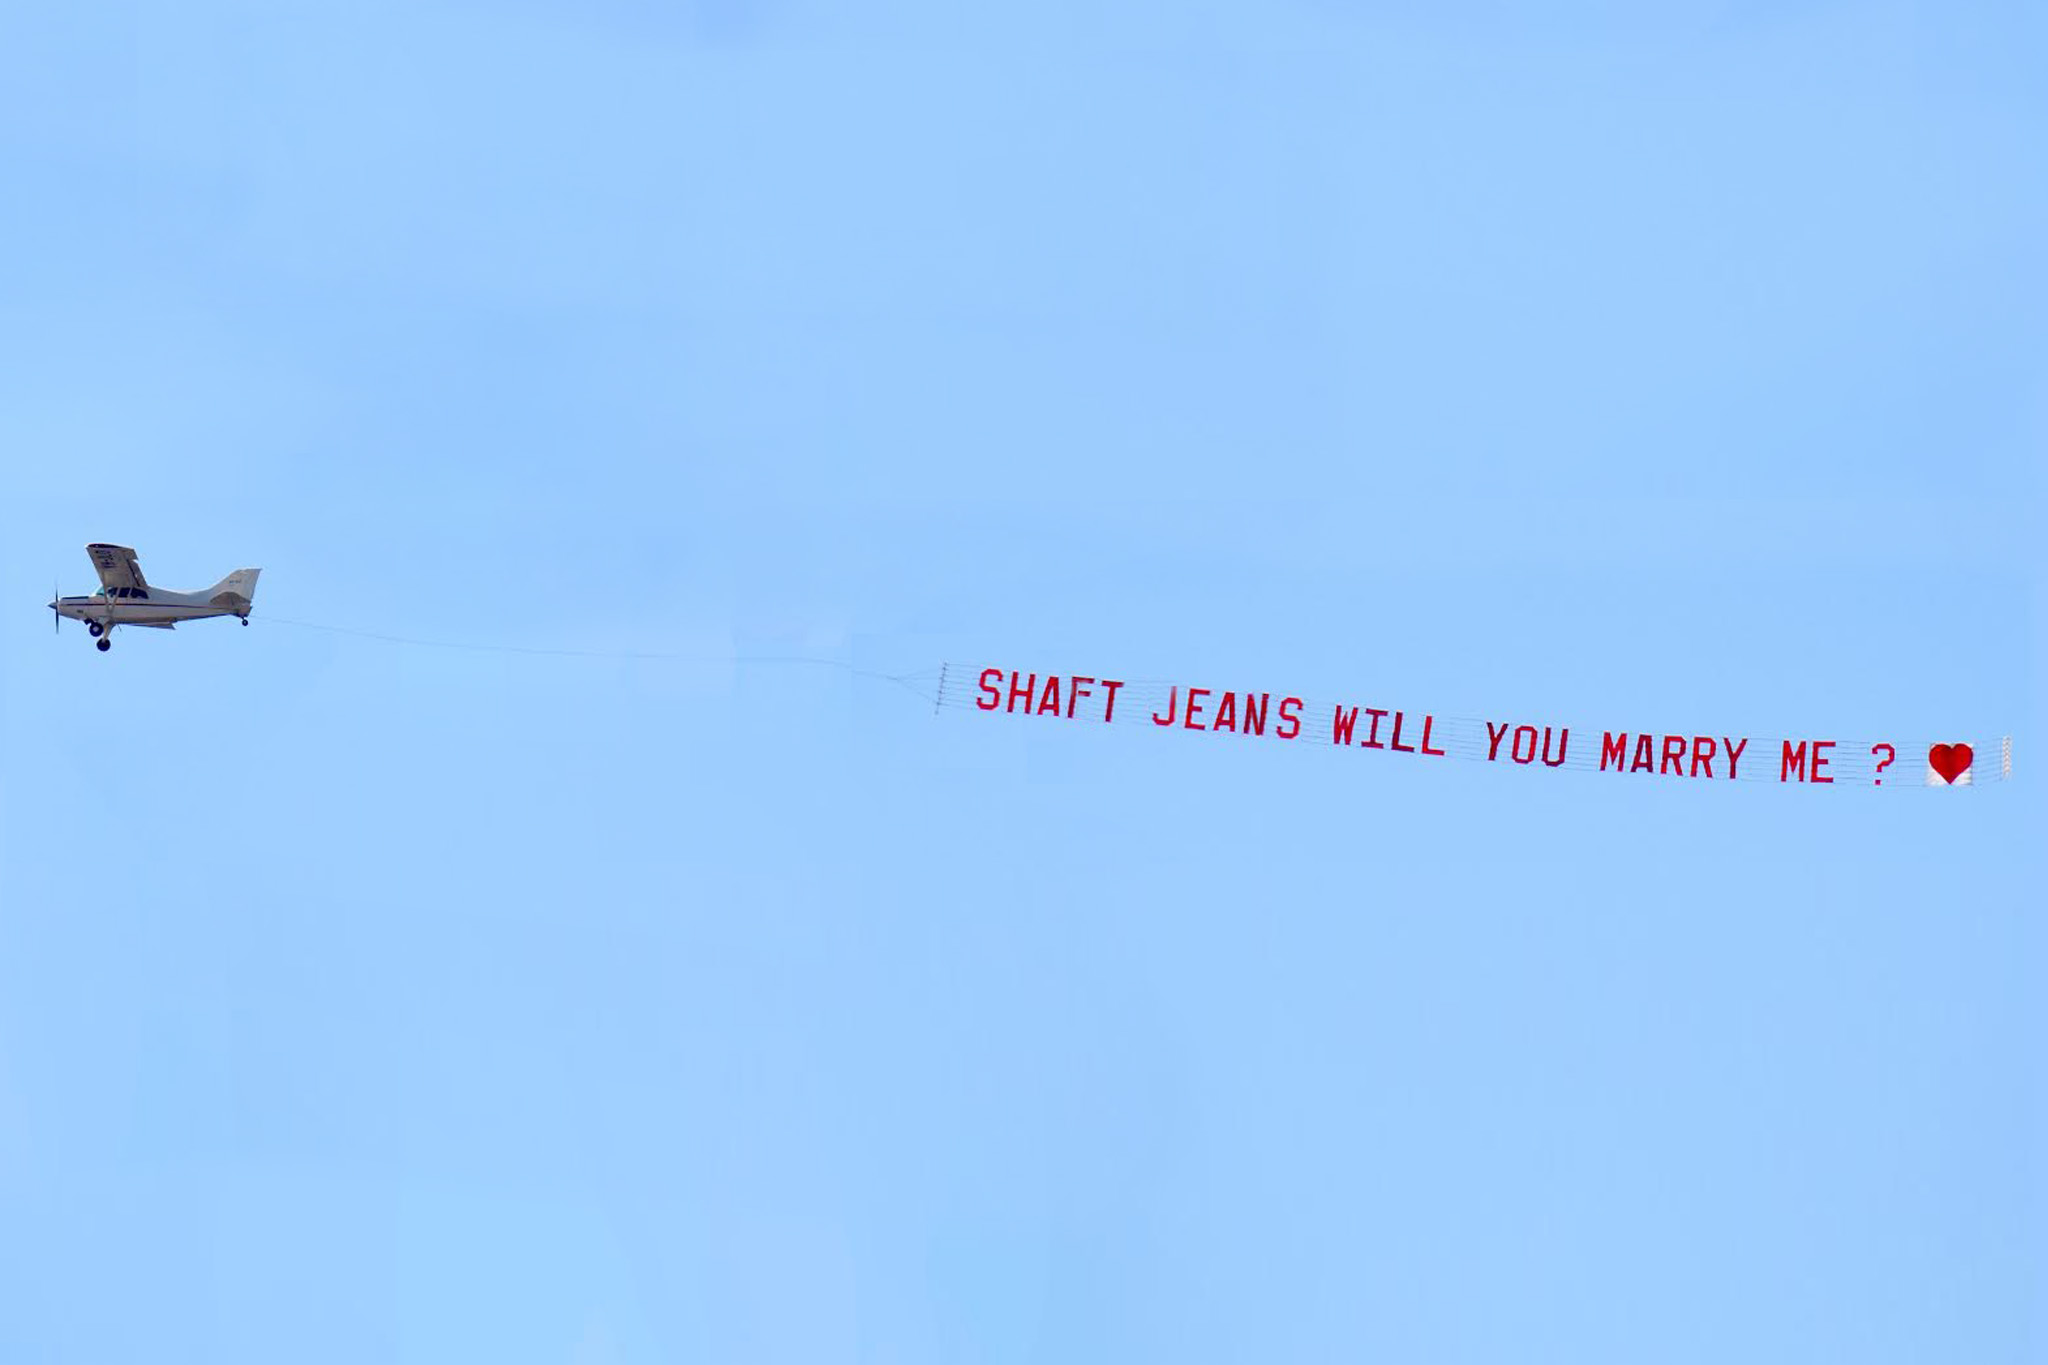 Shaft Jeans, will you marry me?